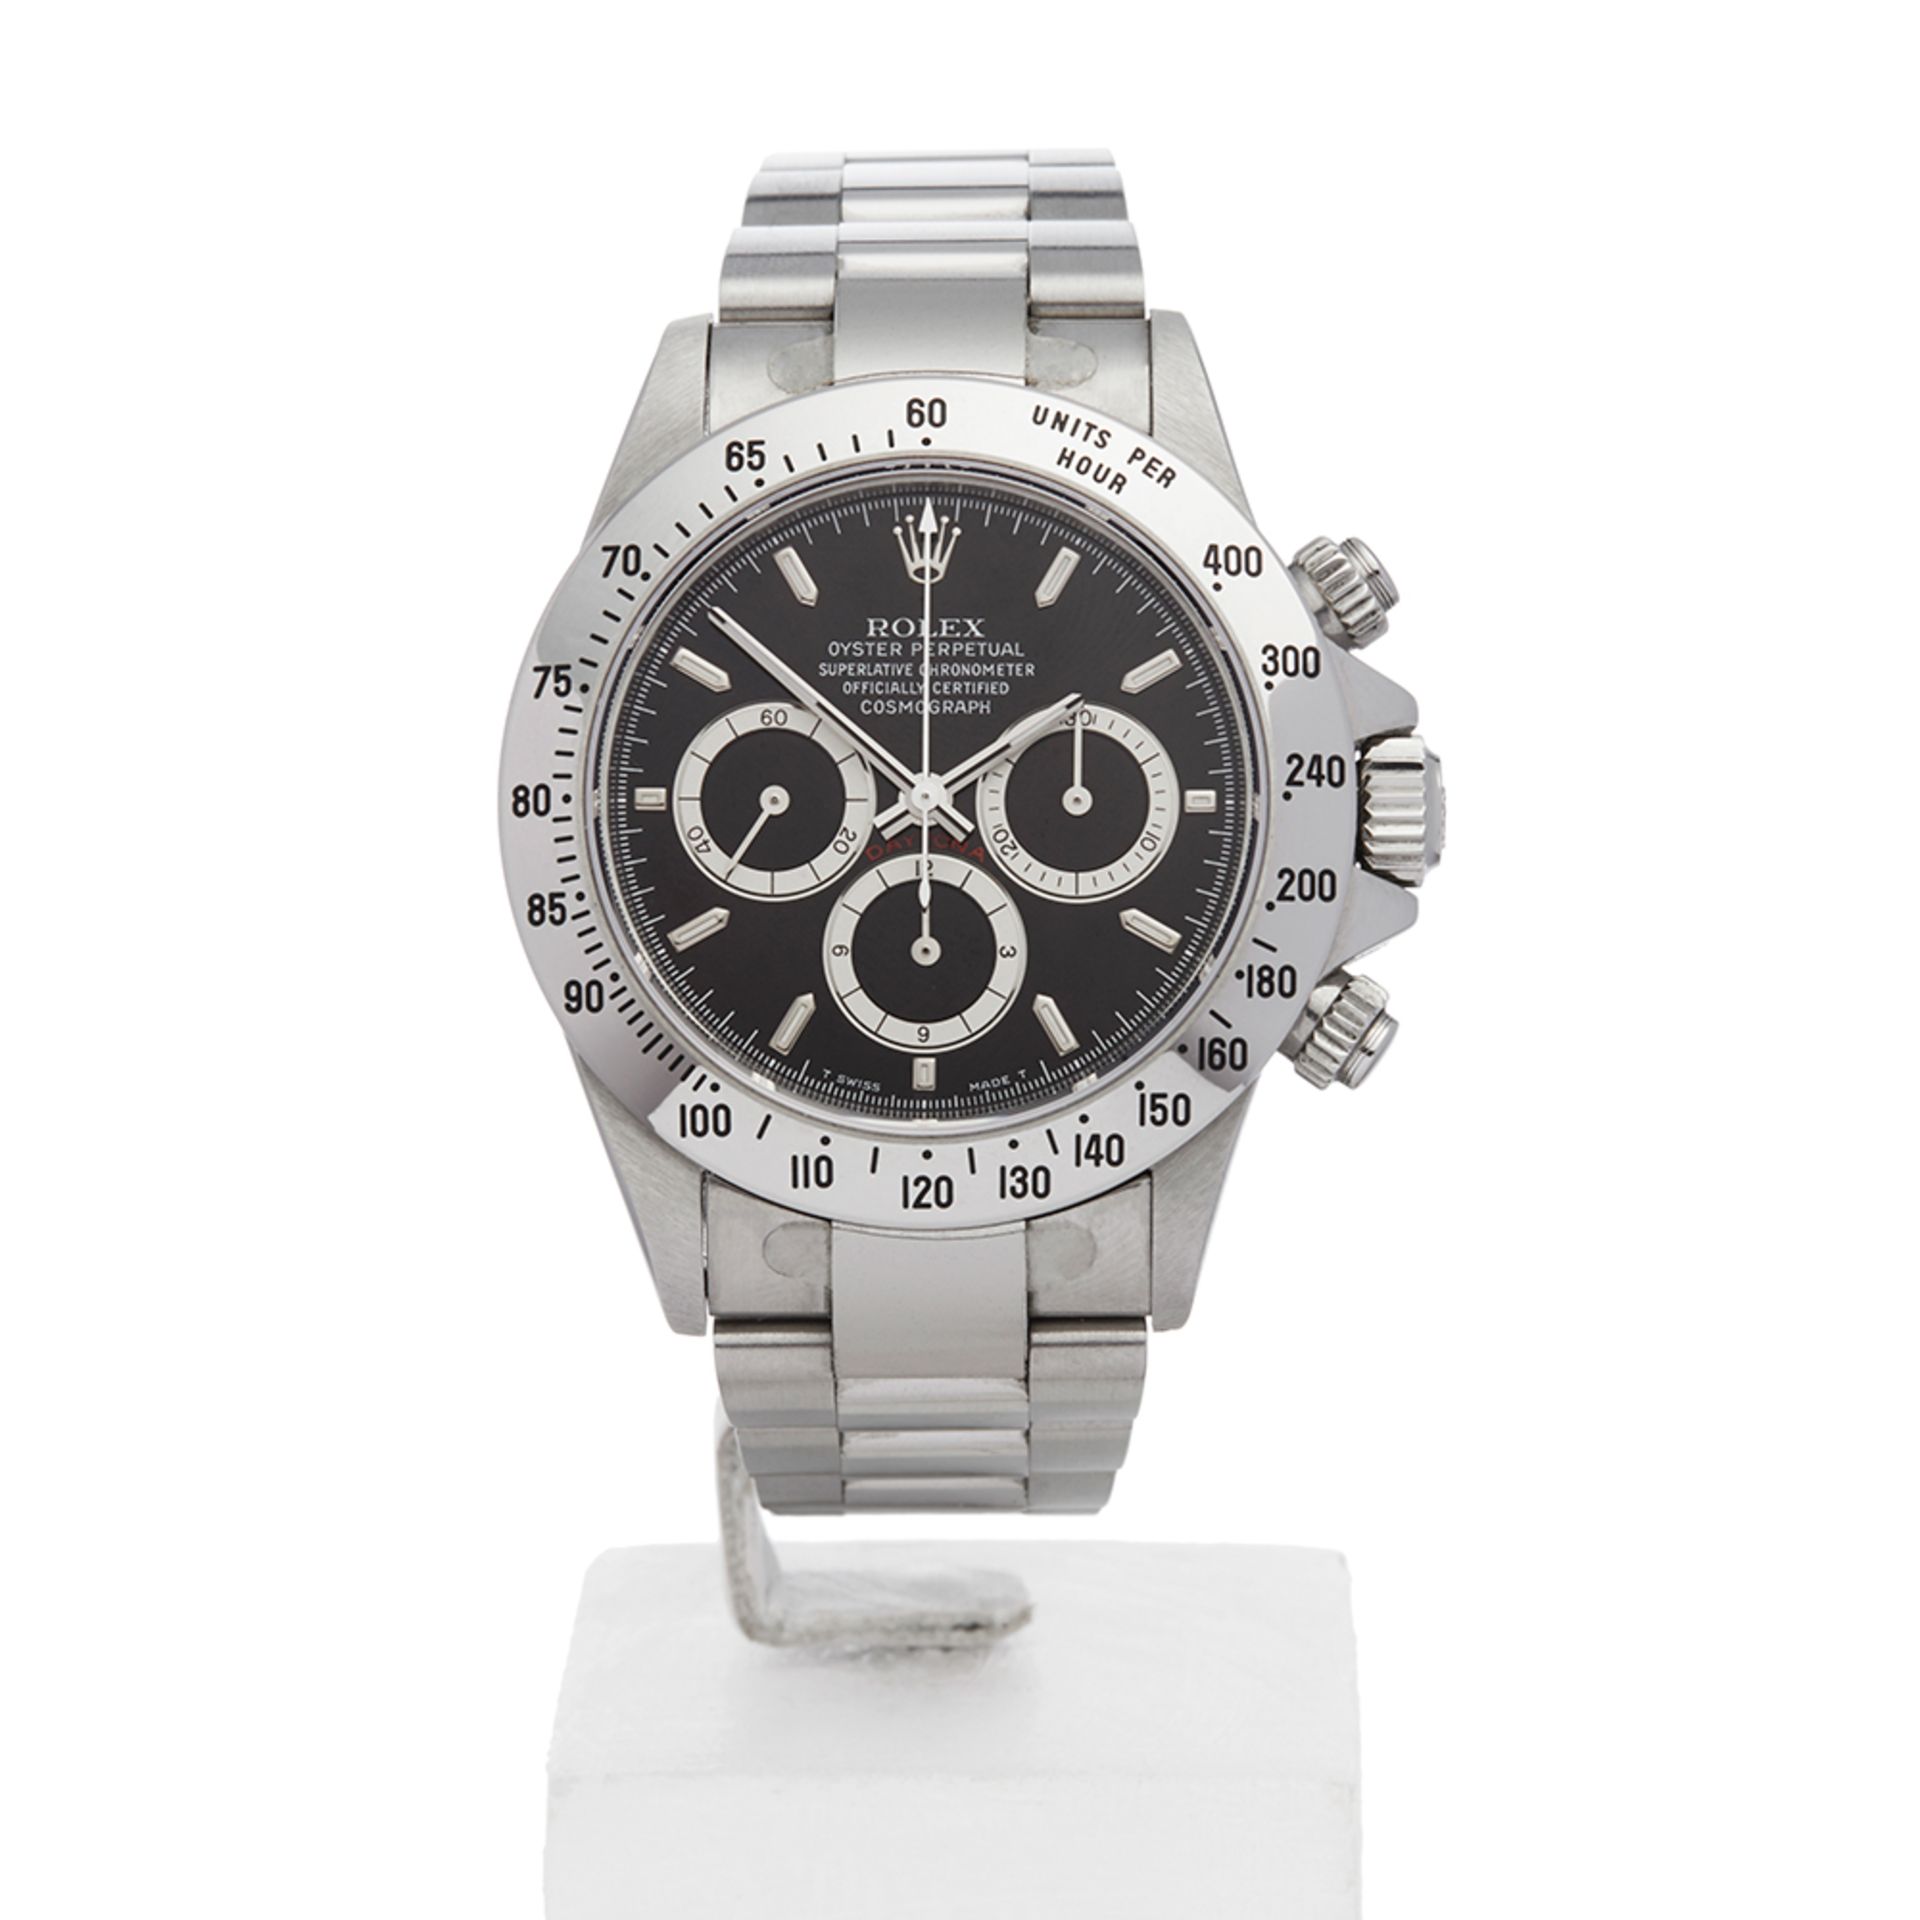 Rolex Daytona Zenith Chronograph Inverted 6 40mm Stainless Steel - 16520 - Image 2 of 8